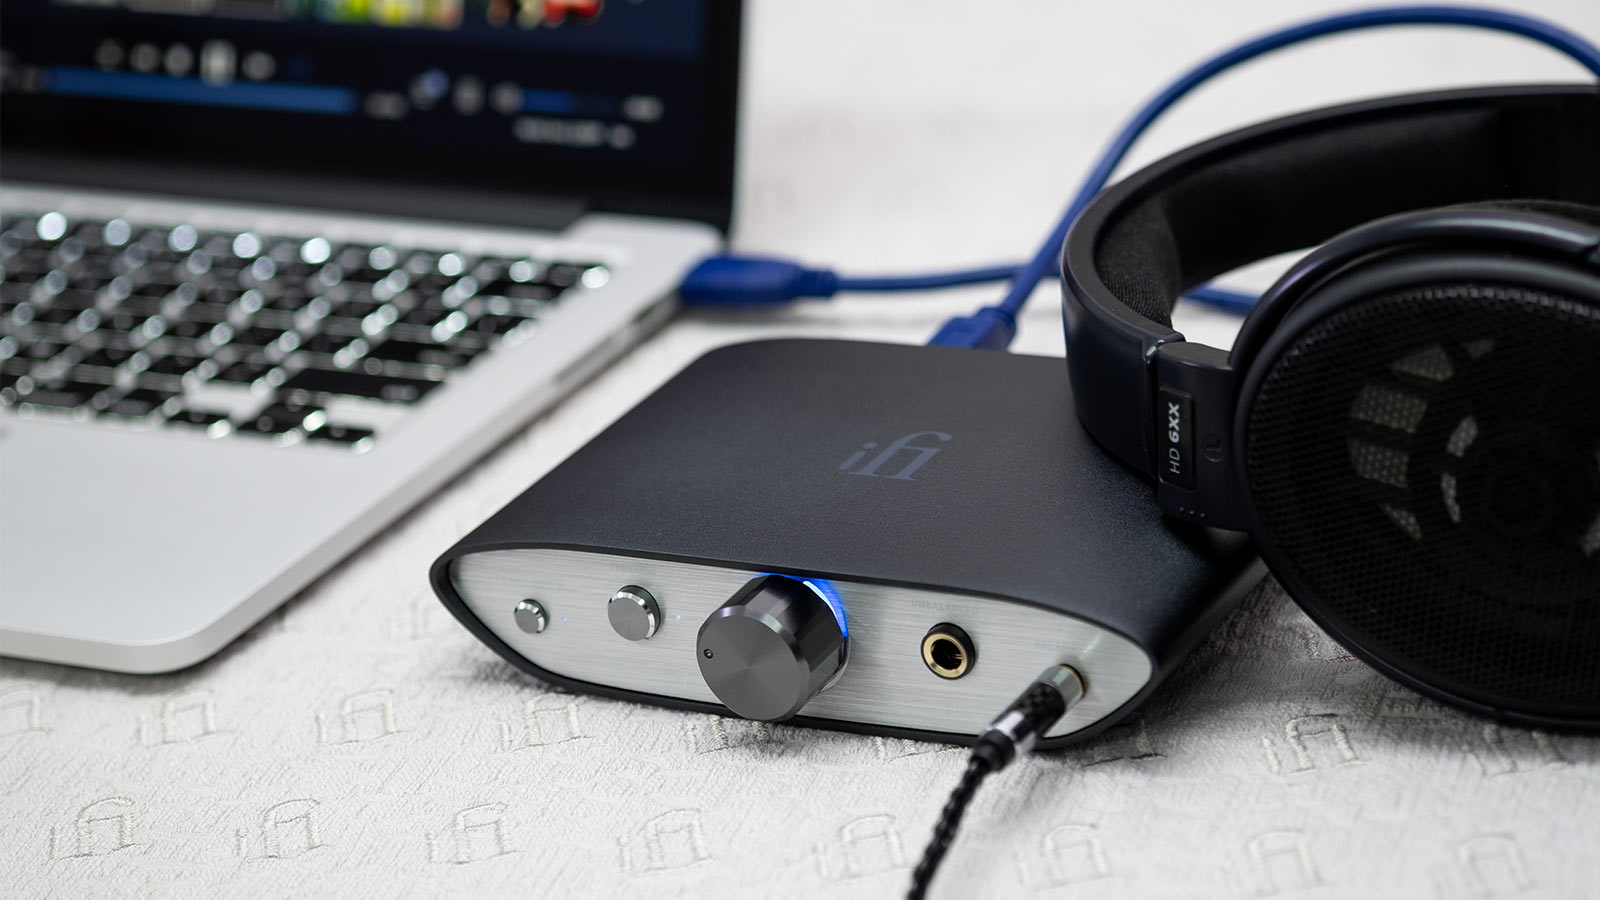 What is a DAC and what are its Benefits? - iFi audio